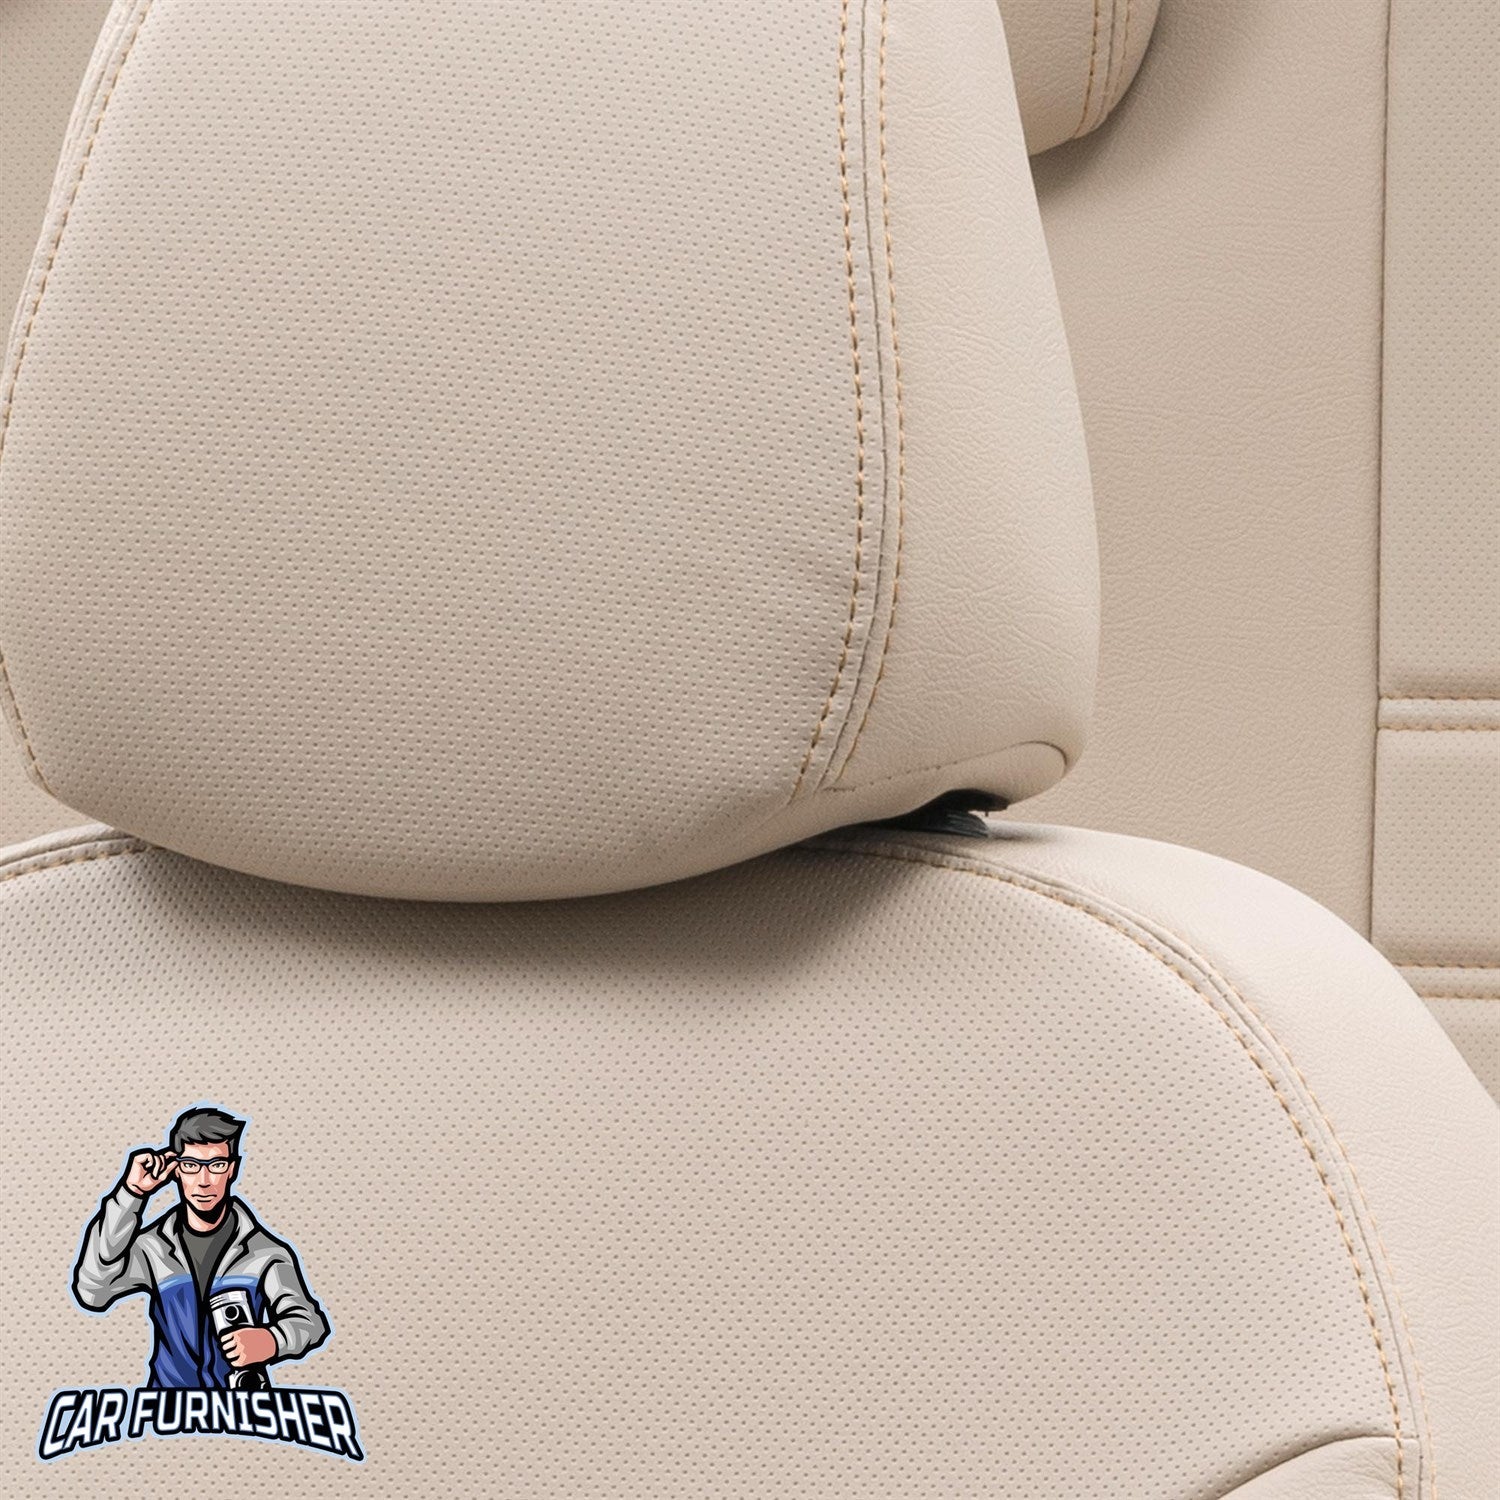 Volvo V50 Seat Cover Istanbul Leather Design Beige Leather